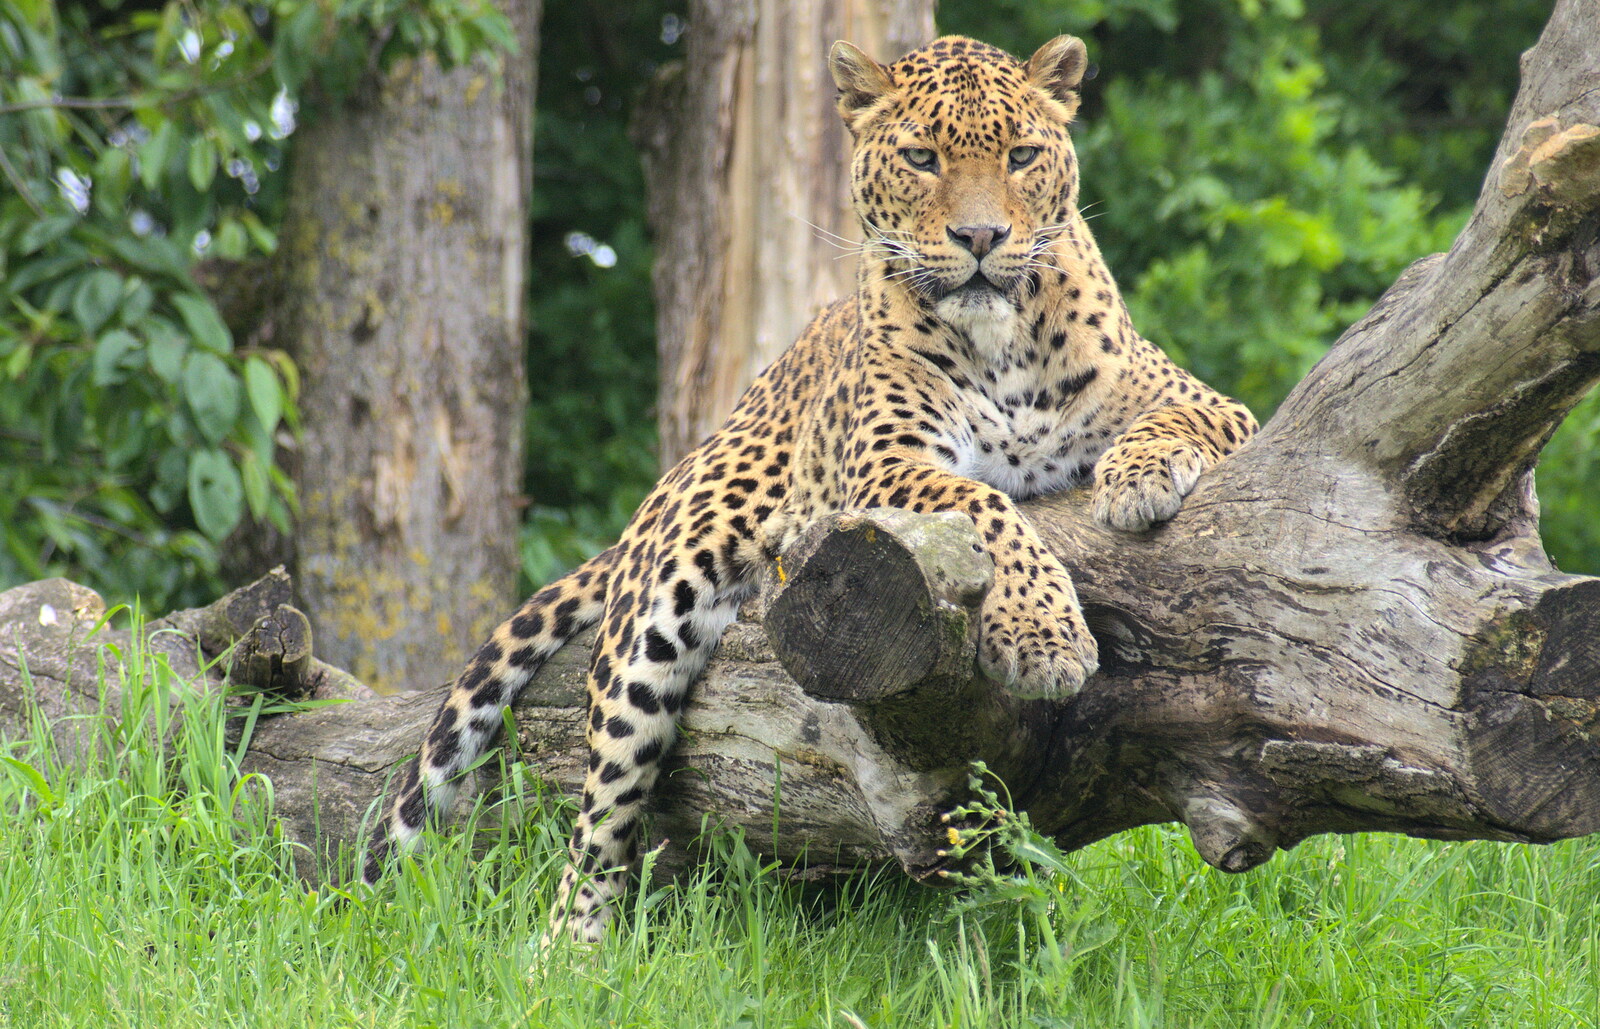 Another view of the leopard from Another Trip to Banham Zoo, Banham, Norfolk - 6th June 2012